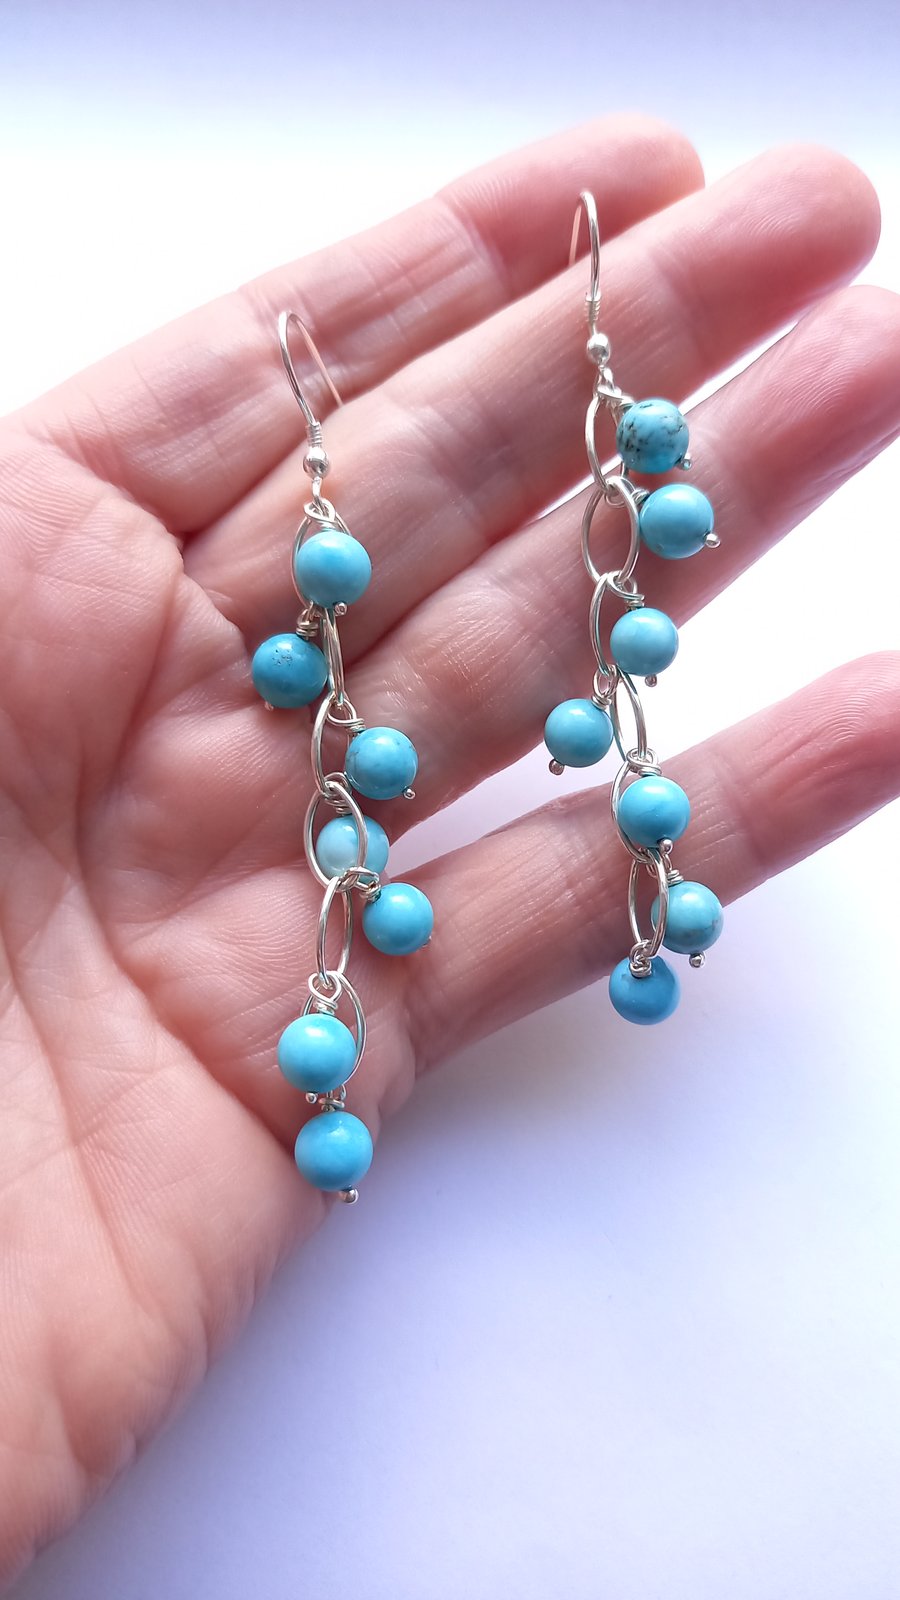 Turquoise Waterfall Earrings with Sterling Silver Hooks